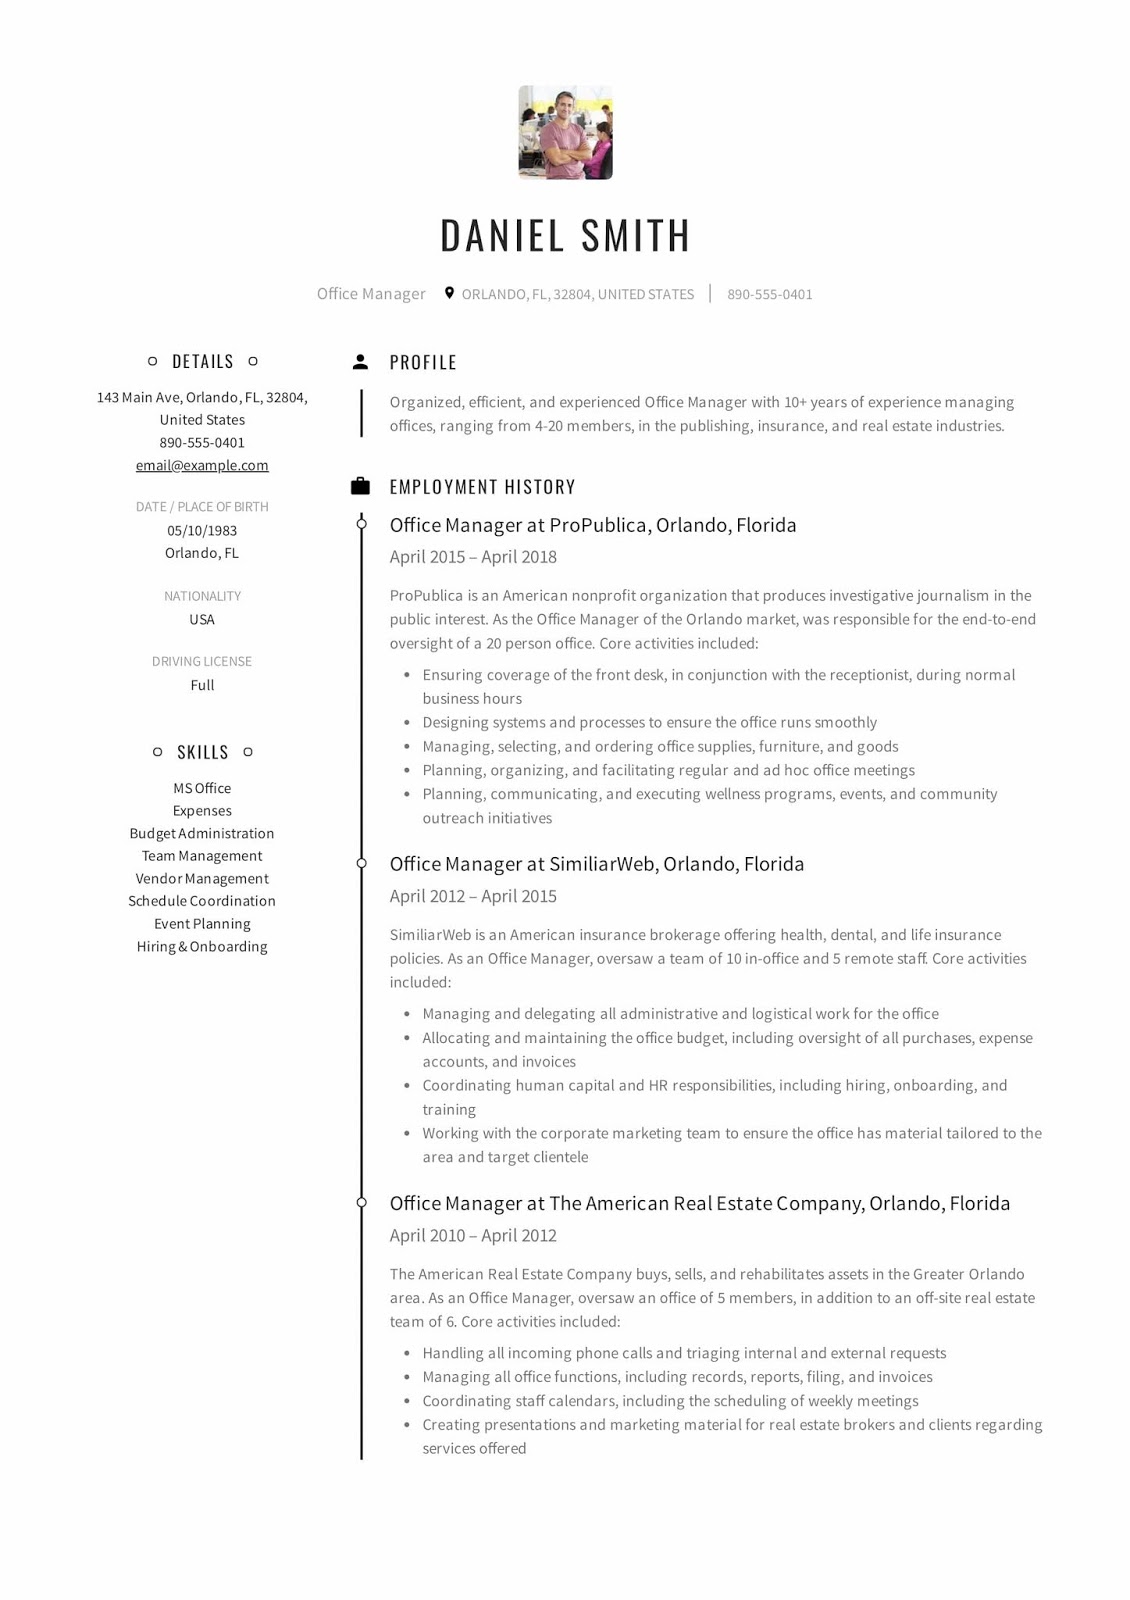 office manager resume examples 2019, office manager resume examples, office manager resume examples 2017, front office manager resume samples, office manager resume example, office manager resume samples 2018, office manager resume samples free, office manager resume samples 2019,